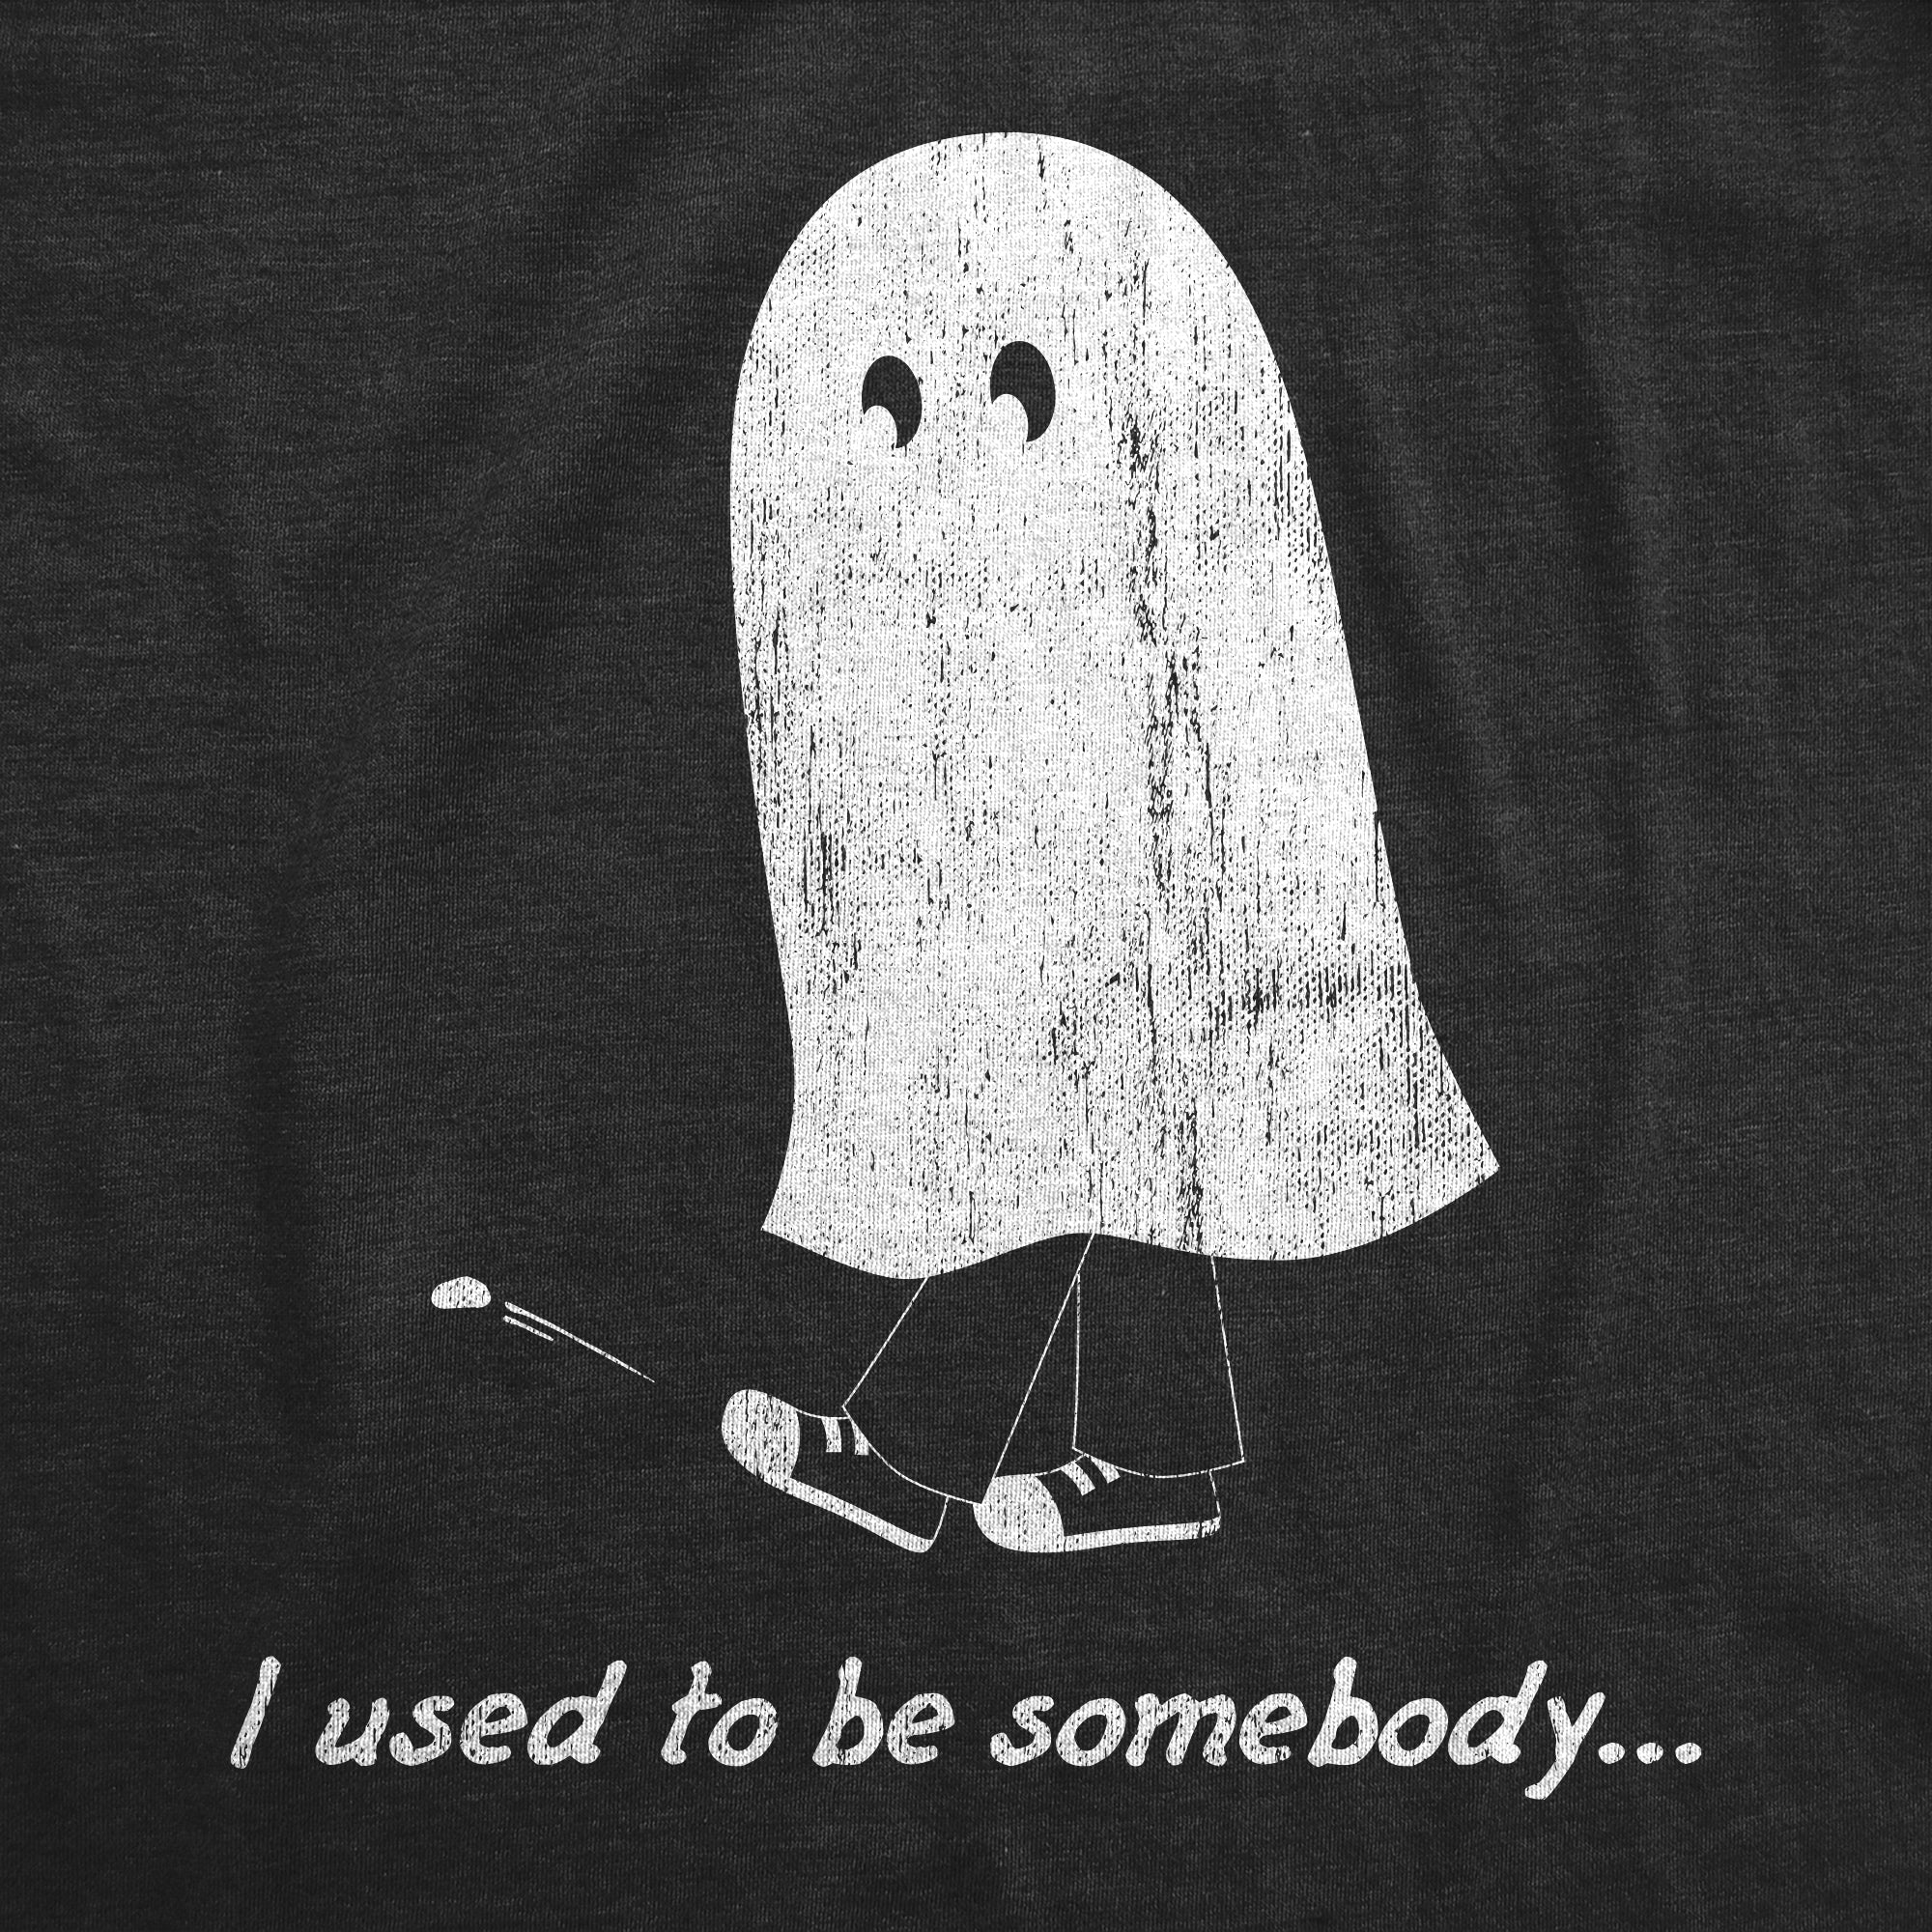 Funny Heather Black - SOMEBODY I Used To Be Somebody Womens T Shirt Nerdy Halloween Sarcastic Tee